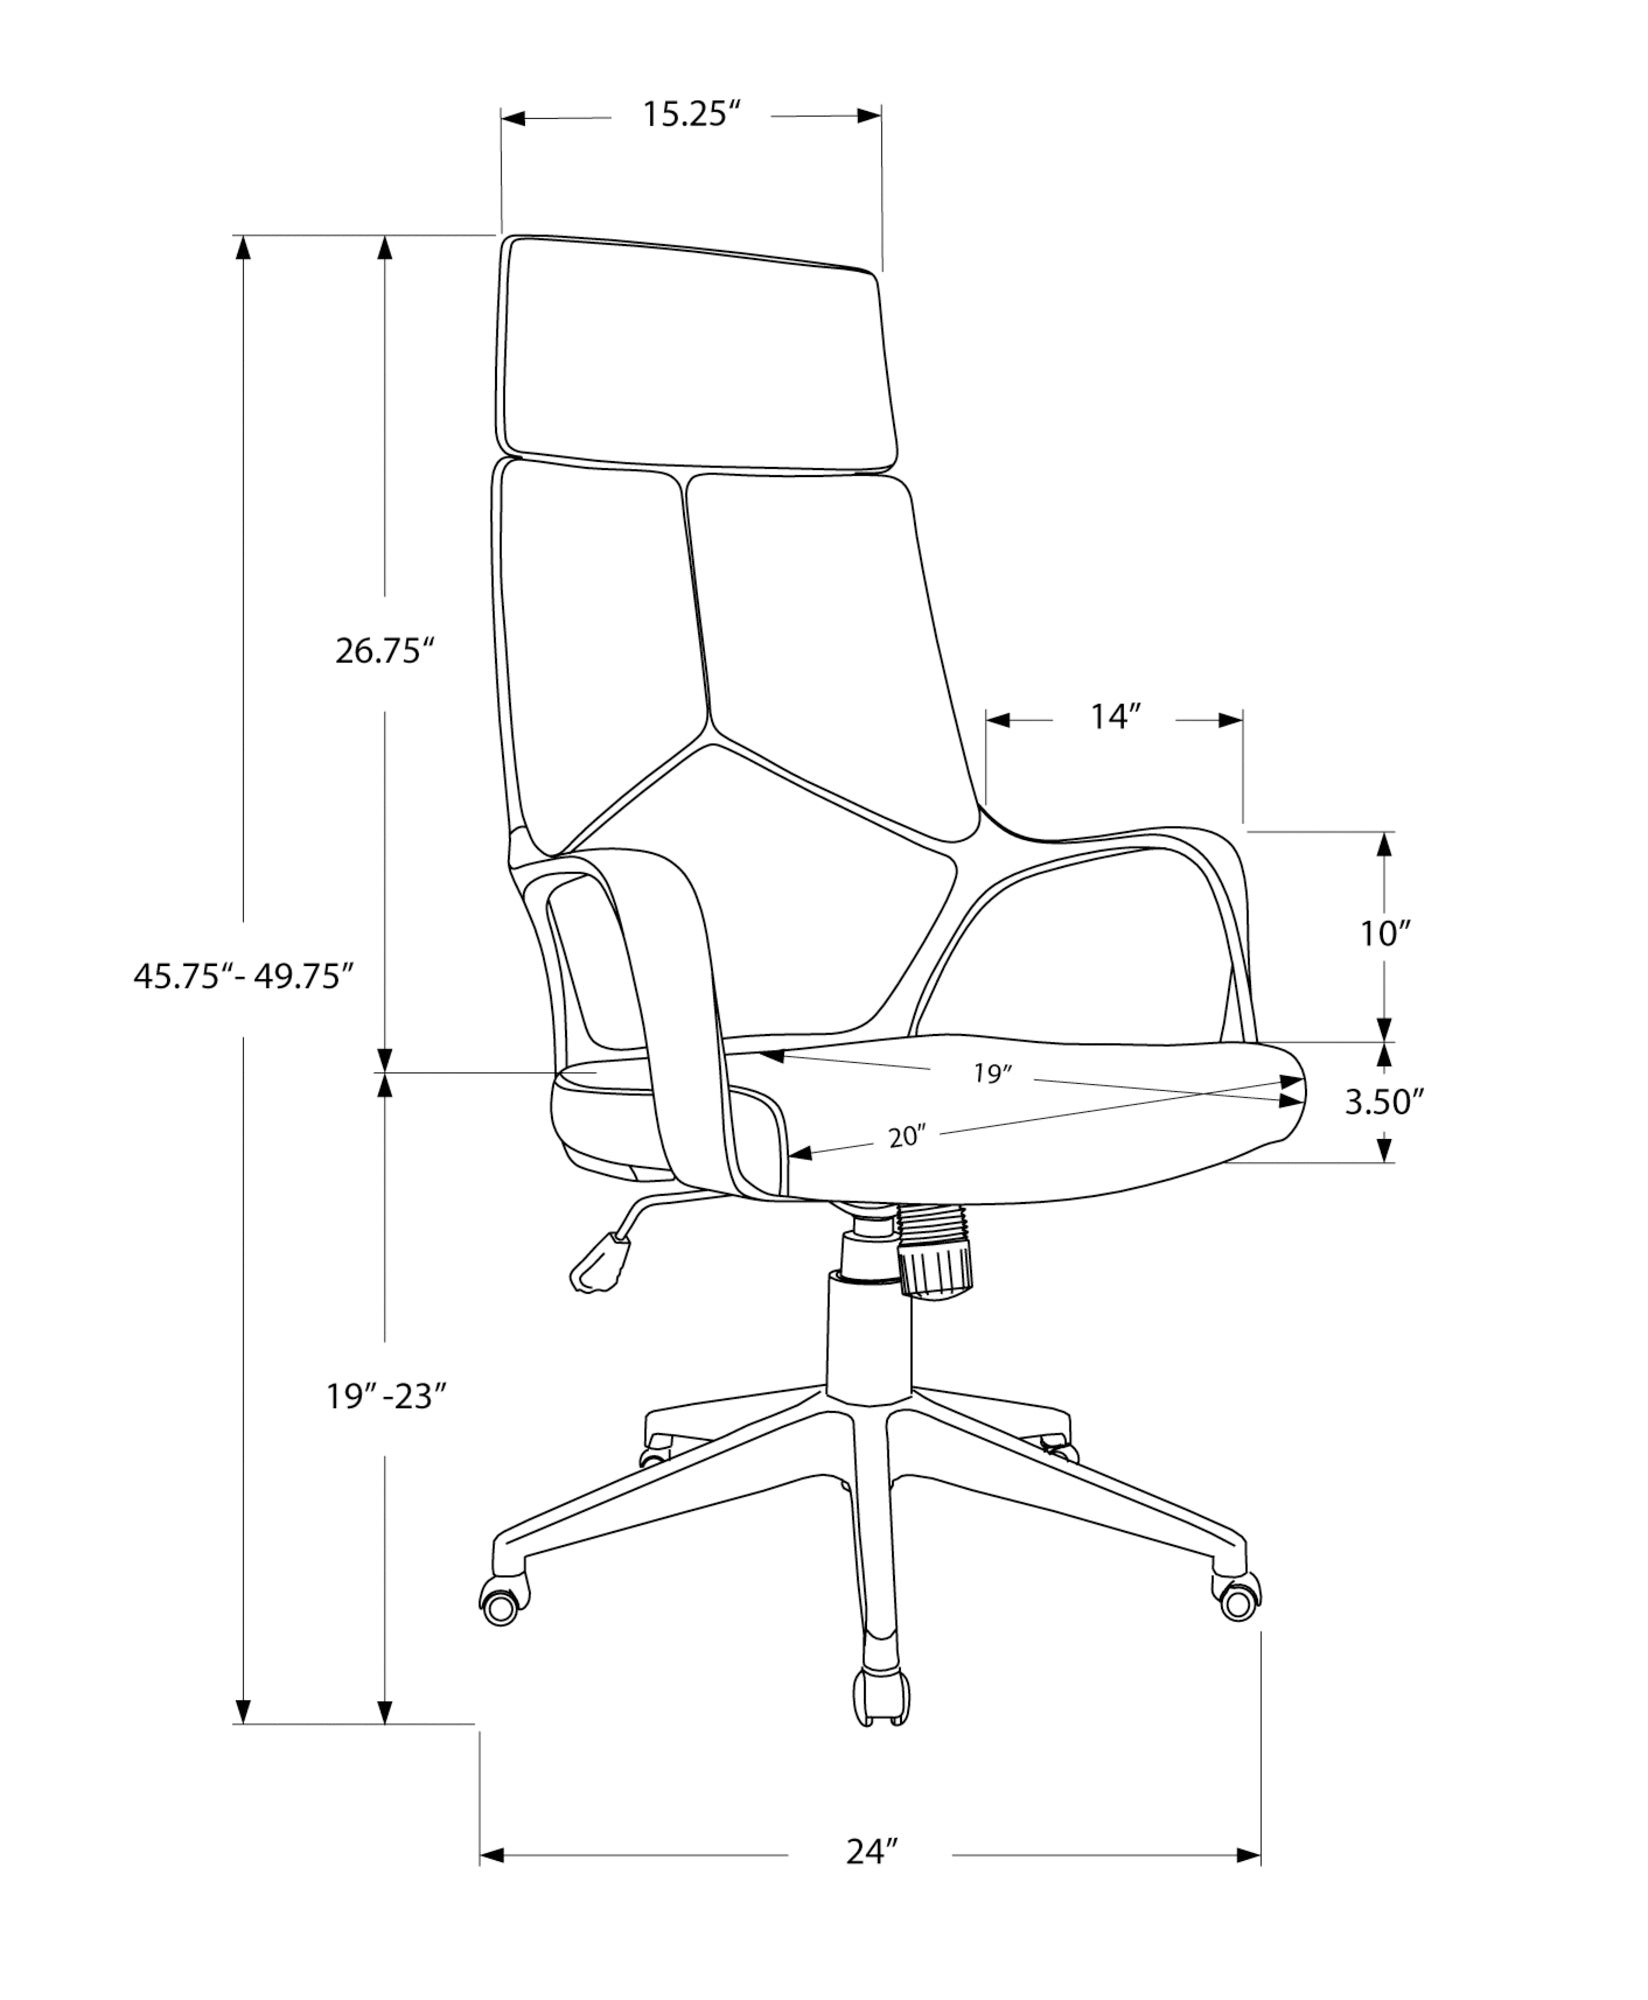 Office Chair - White / Grey Fabric / High Back Executive